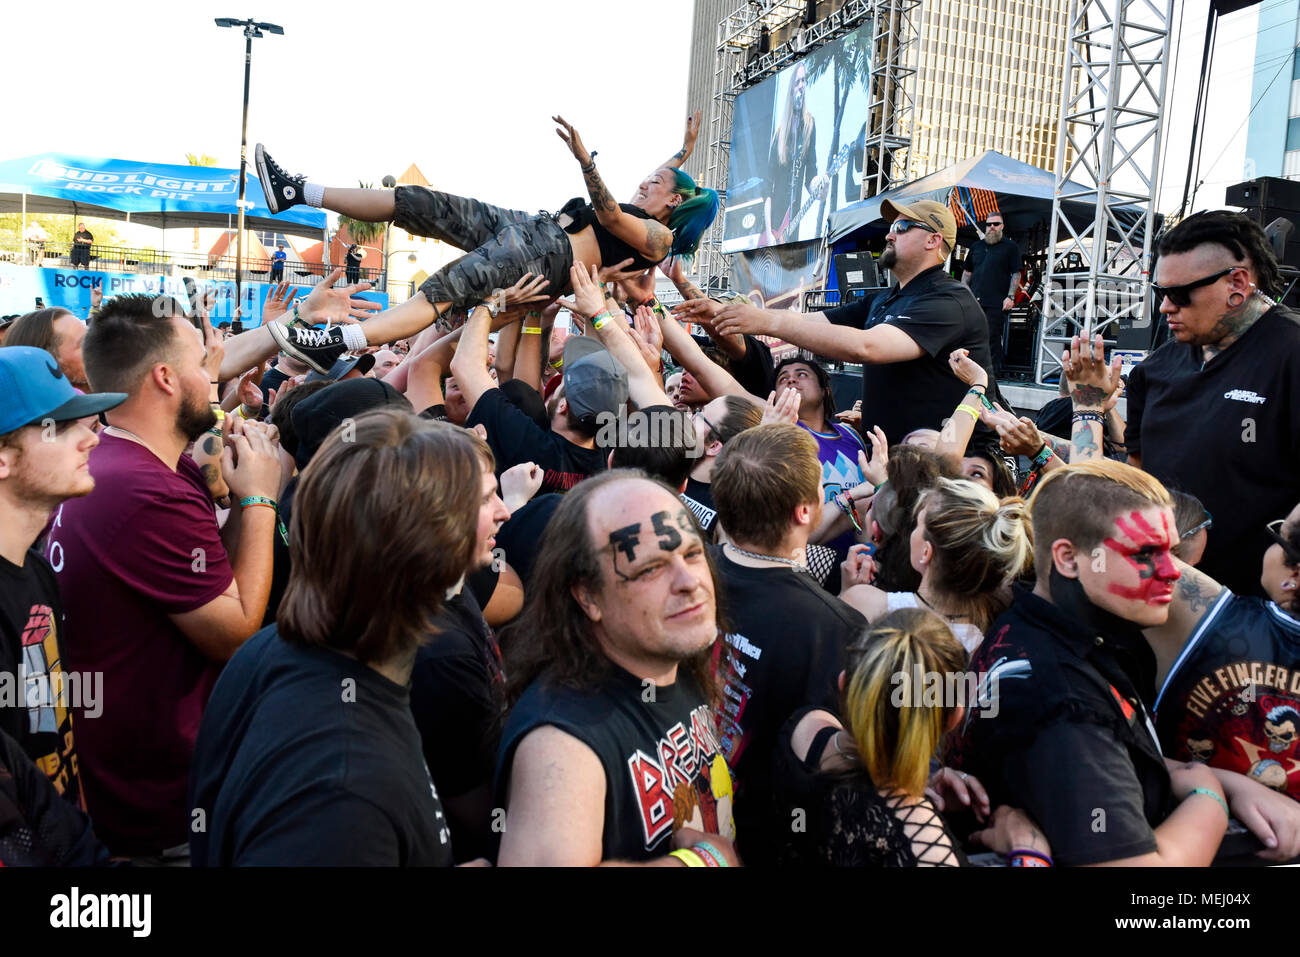 Las Vegas Nevada, USA. April 21, 2018  Crowd surfing on day 2 of the second annual Las Rageous heavy metal music festival held at the Downtown Las Vegas Events Center. Credit: Ken Howard/Alamy Live News Stock Photo